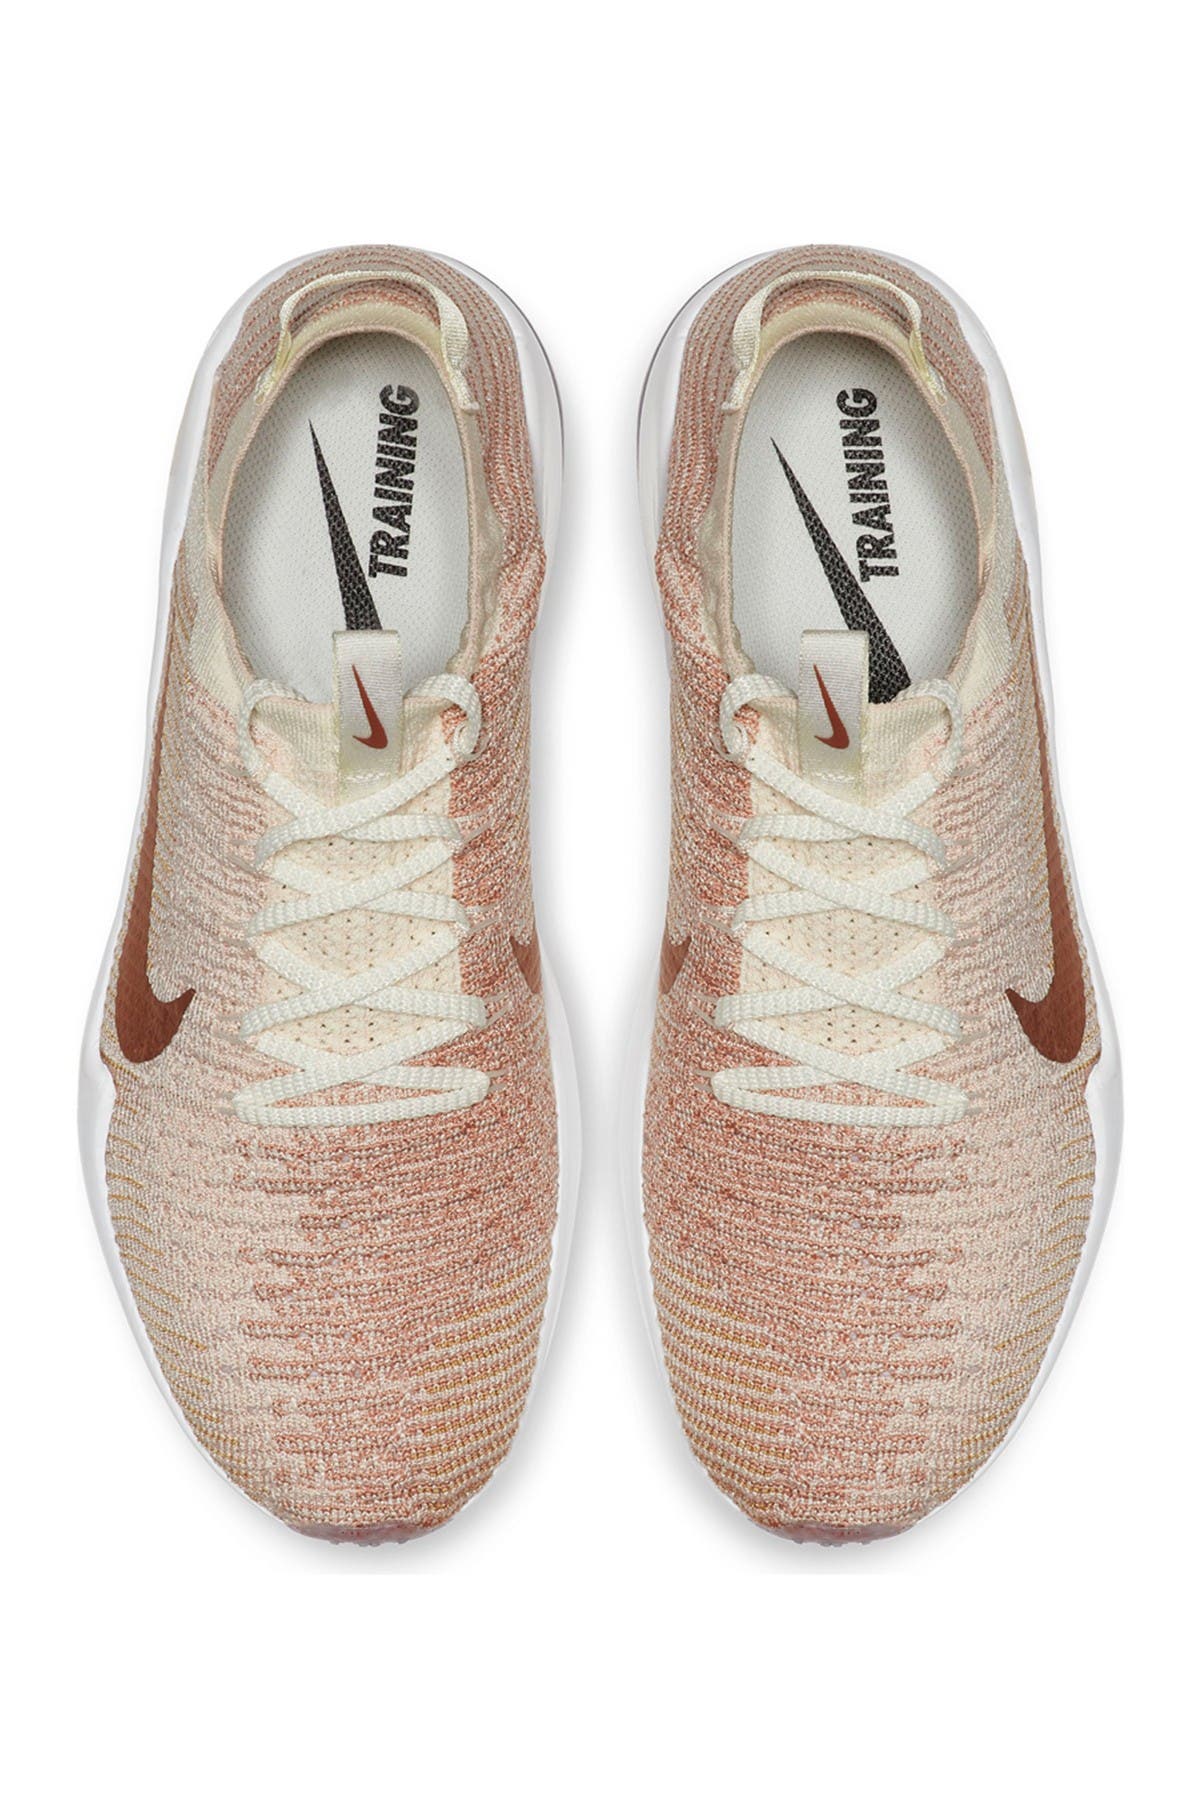 nike training air zoom fearless rose gold